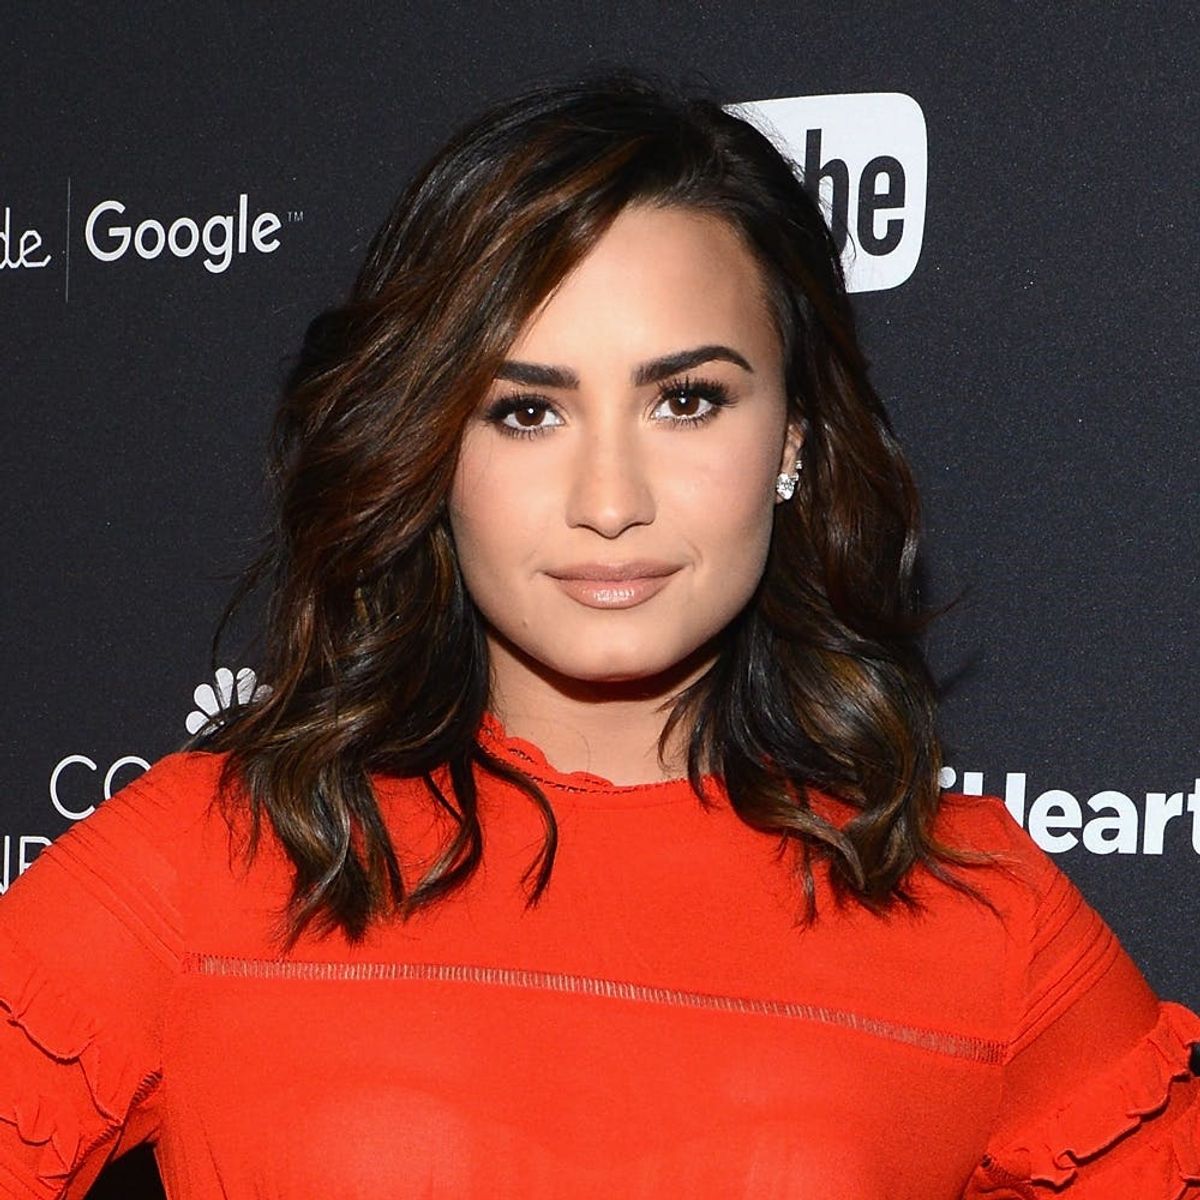 Demi Lovato Throws Shade at Taylor Swift’s #GirlSquad for Not Having “Normal Bodies”